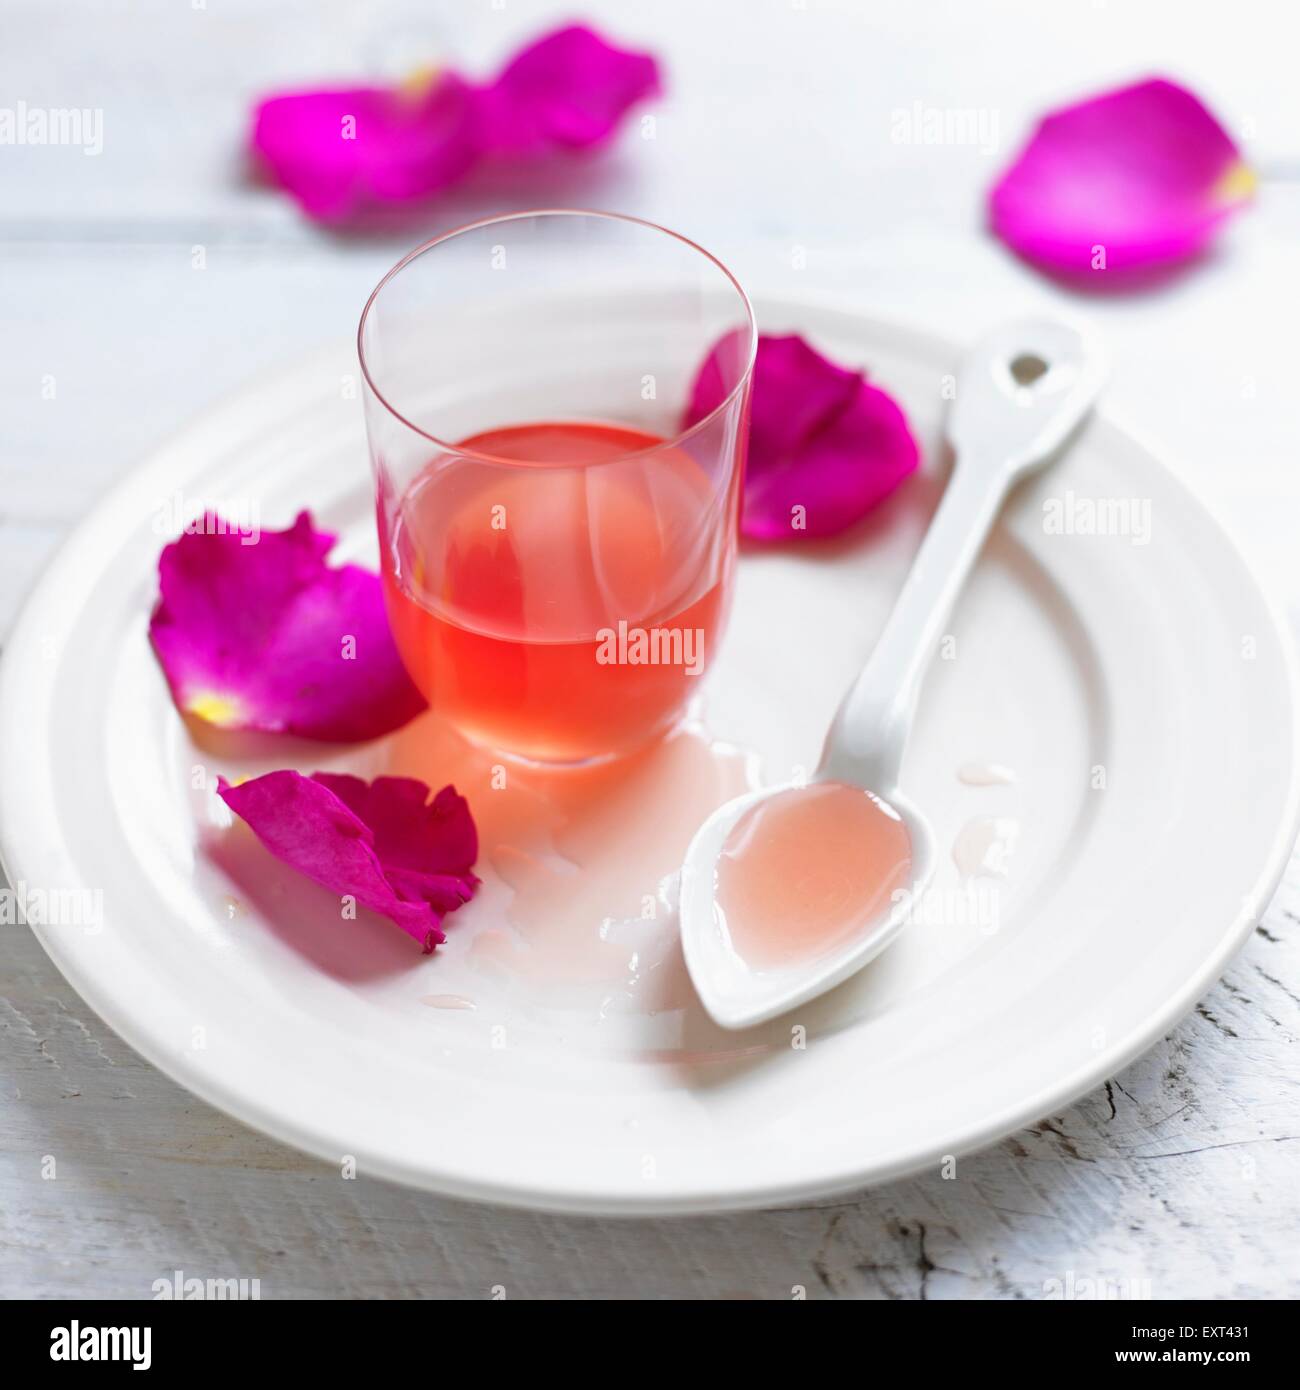 Glass of rose petal syrup, with spoon and petals on a plate Stock Photo